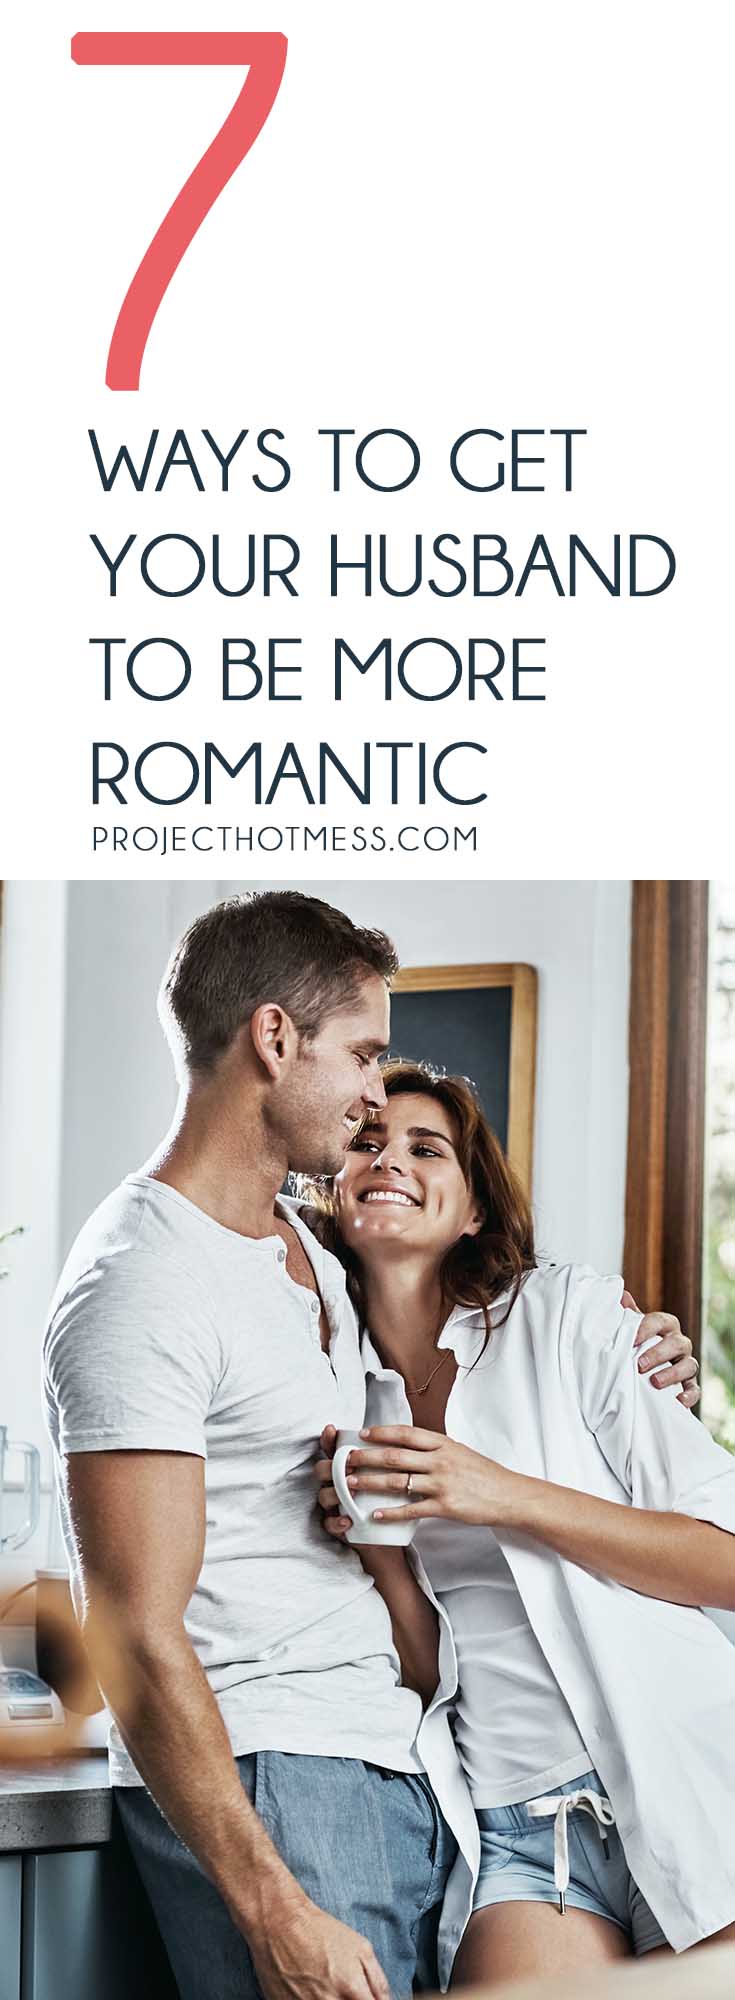 Feel like you're in a romance slump? Wish you could get your husband to be more romantic? You can with these tips to boost romance in your relationship!